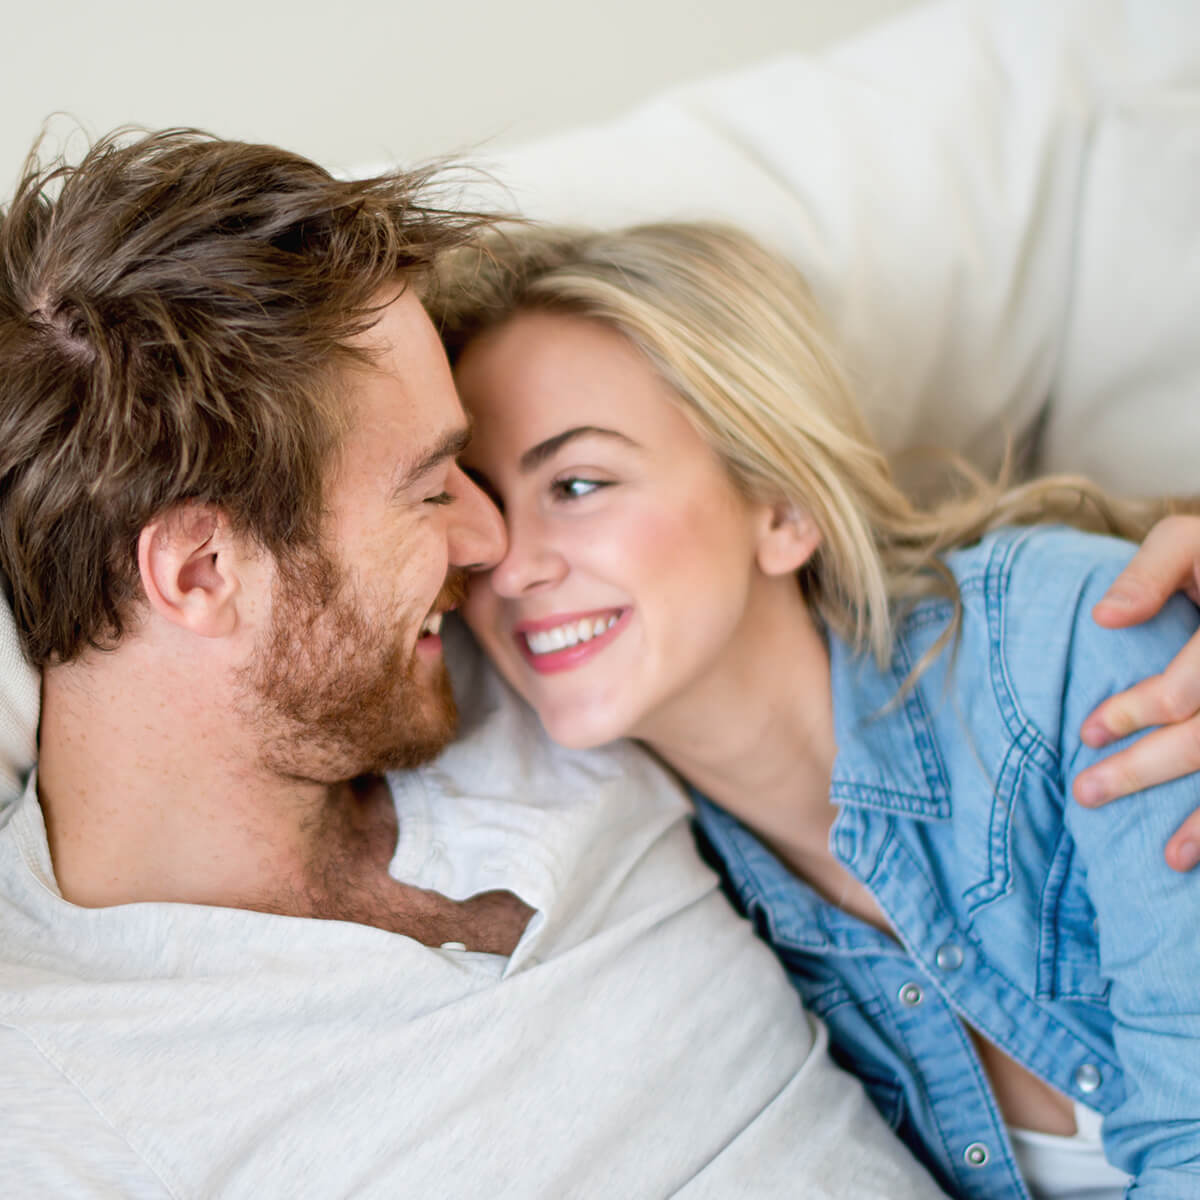 3 Ways of Showing Your Partner You Love Them Every Day